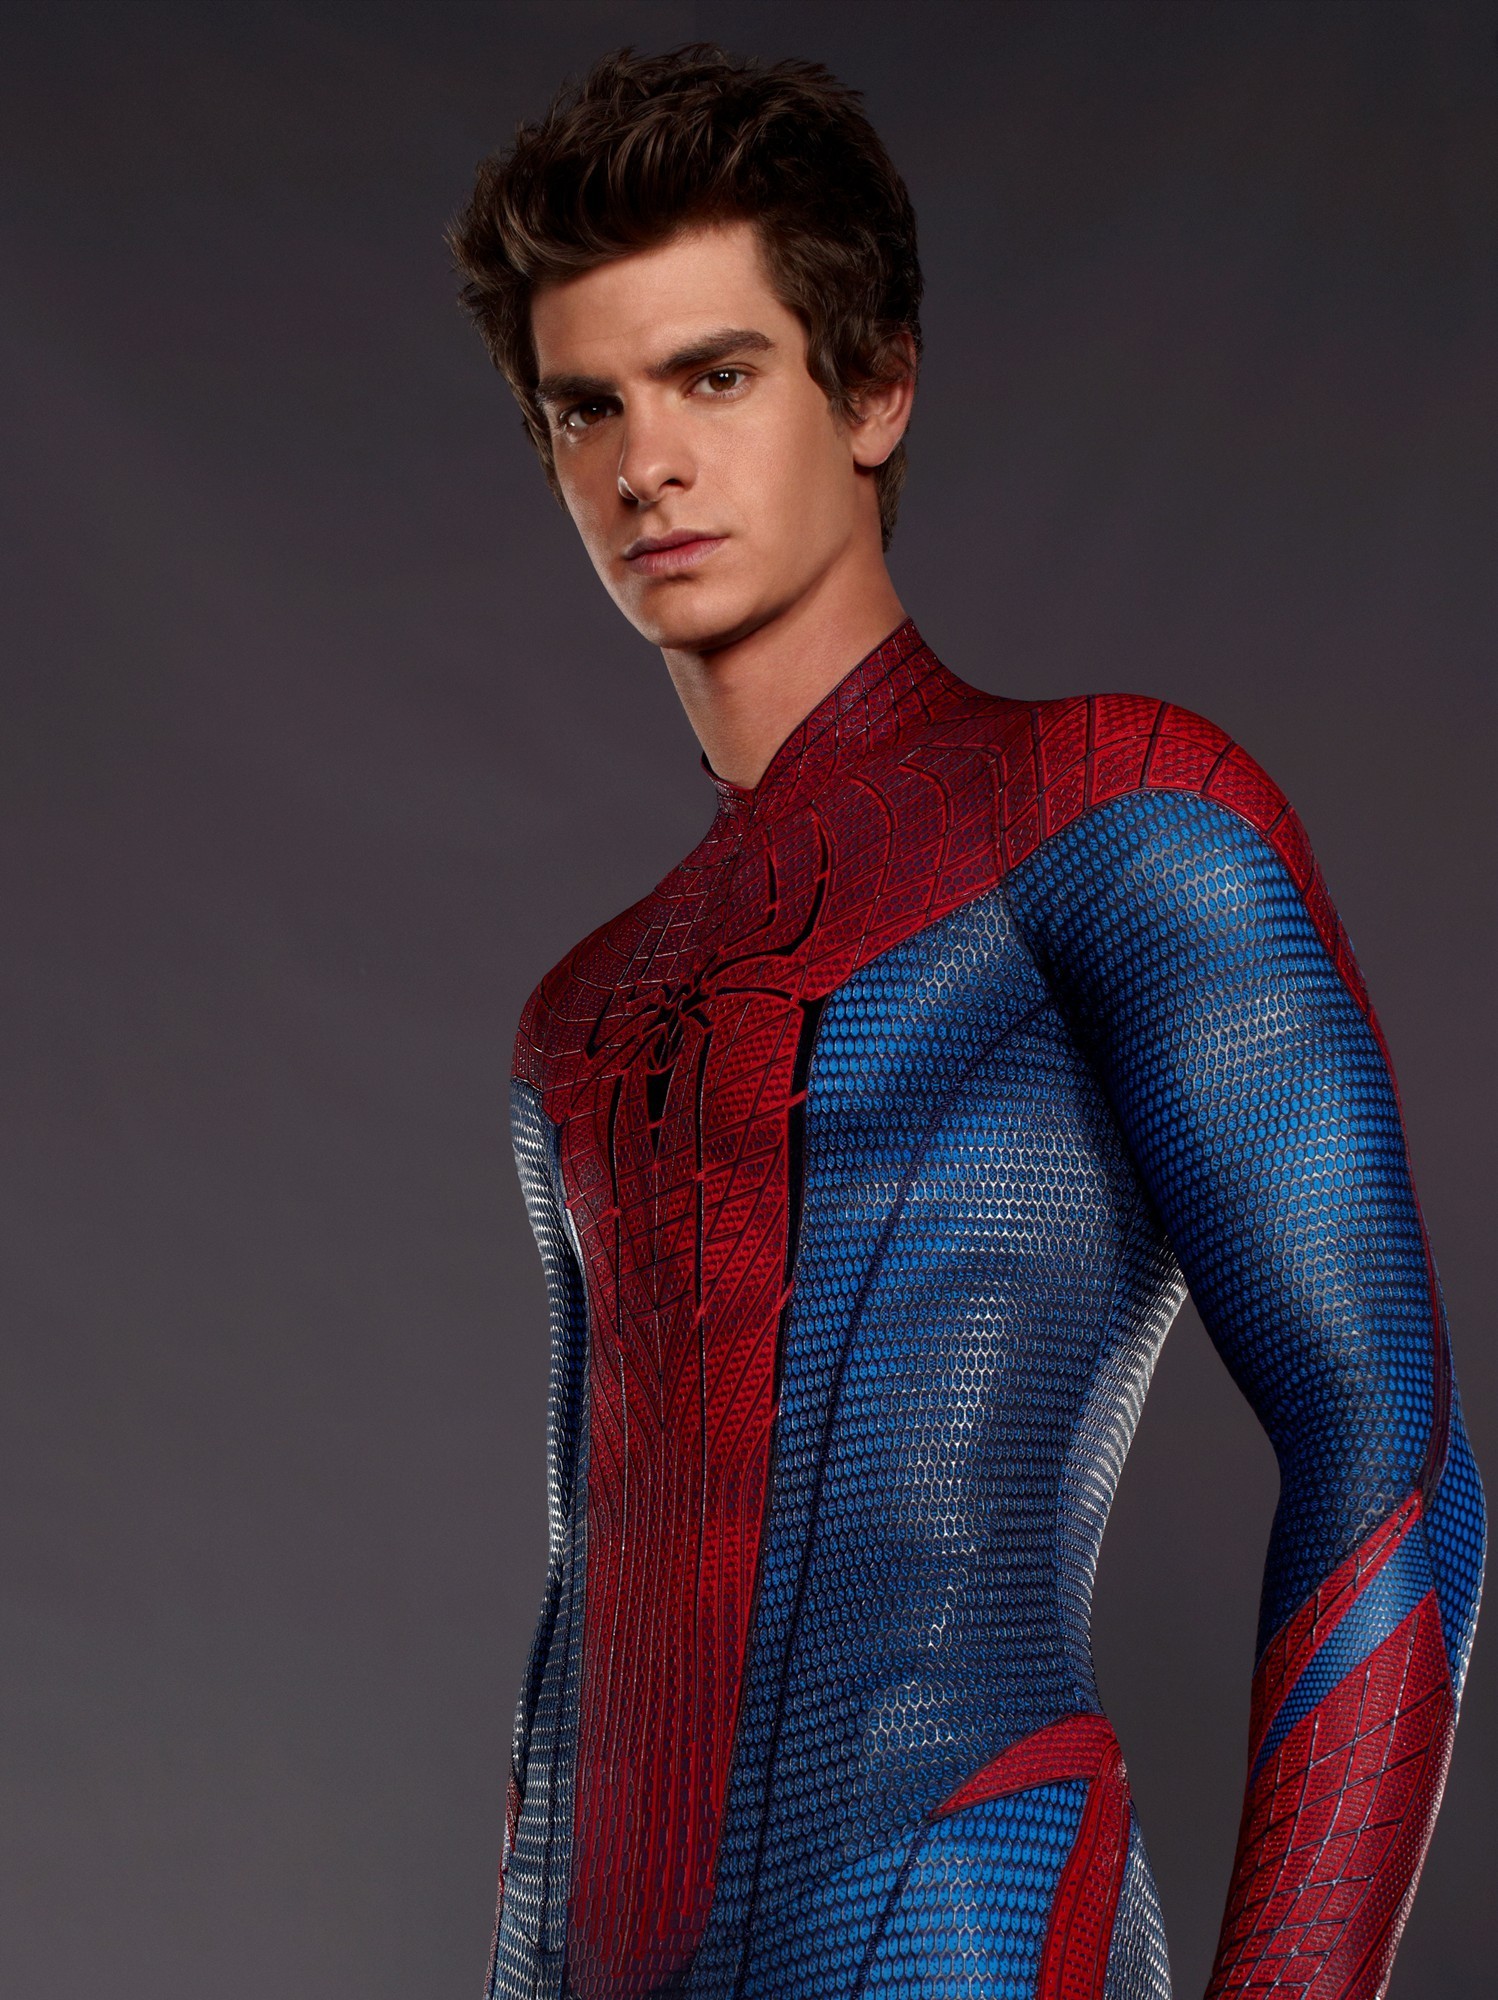 Andrew Garfield stars as Peter Parker/Spider-Man in Columbia Pictures' The Amazing Spider-Man (2012)